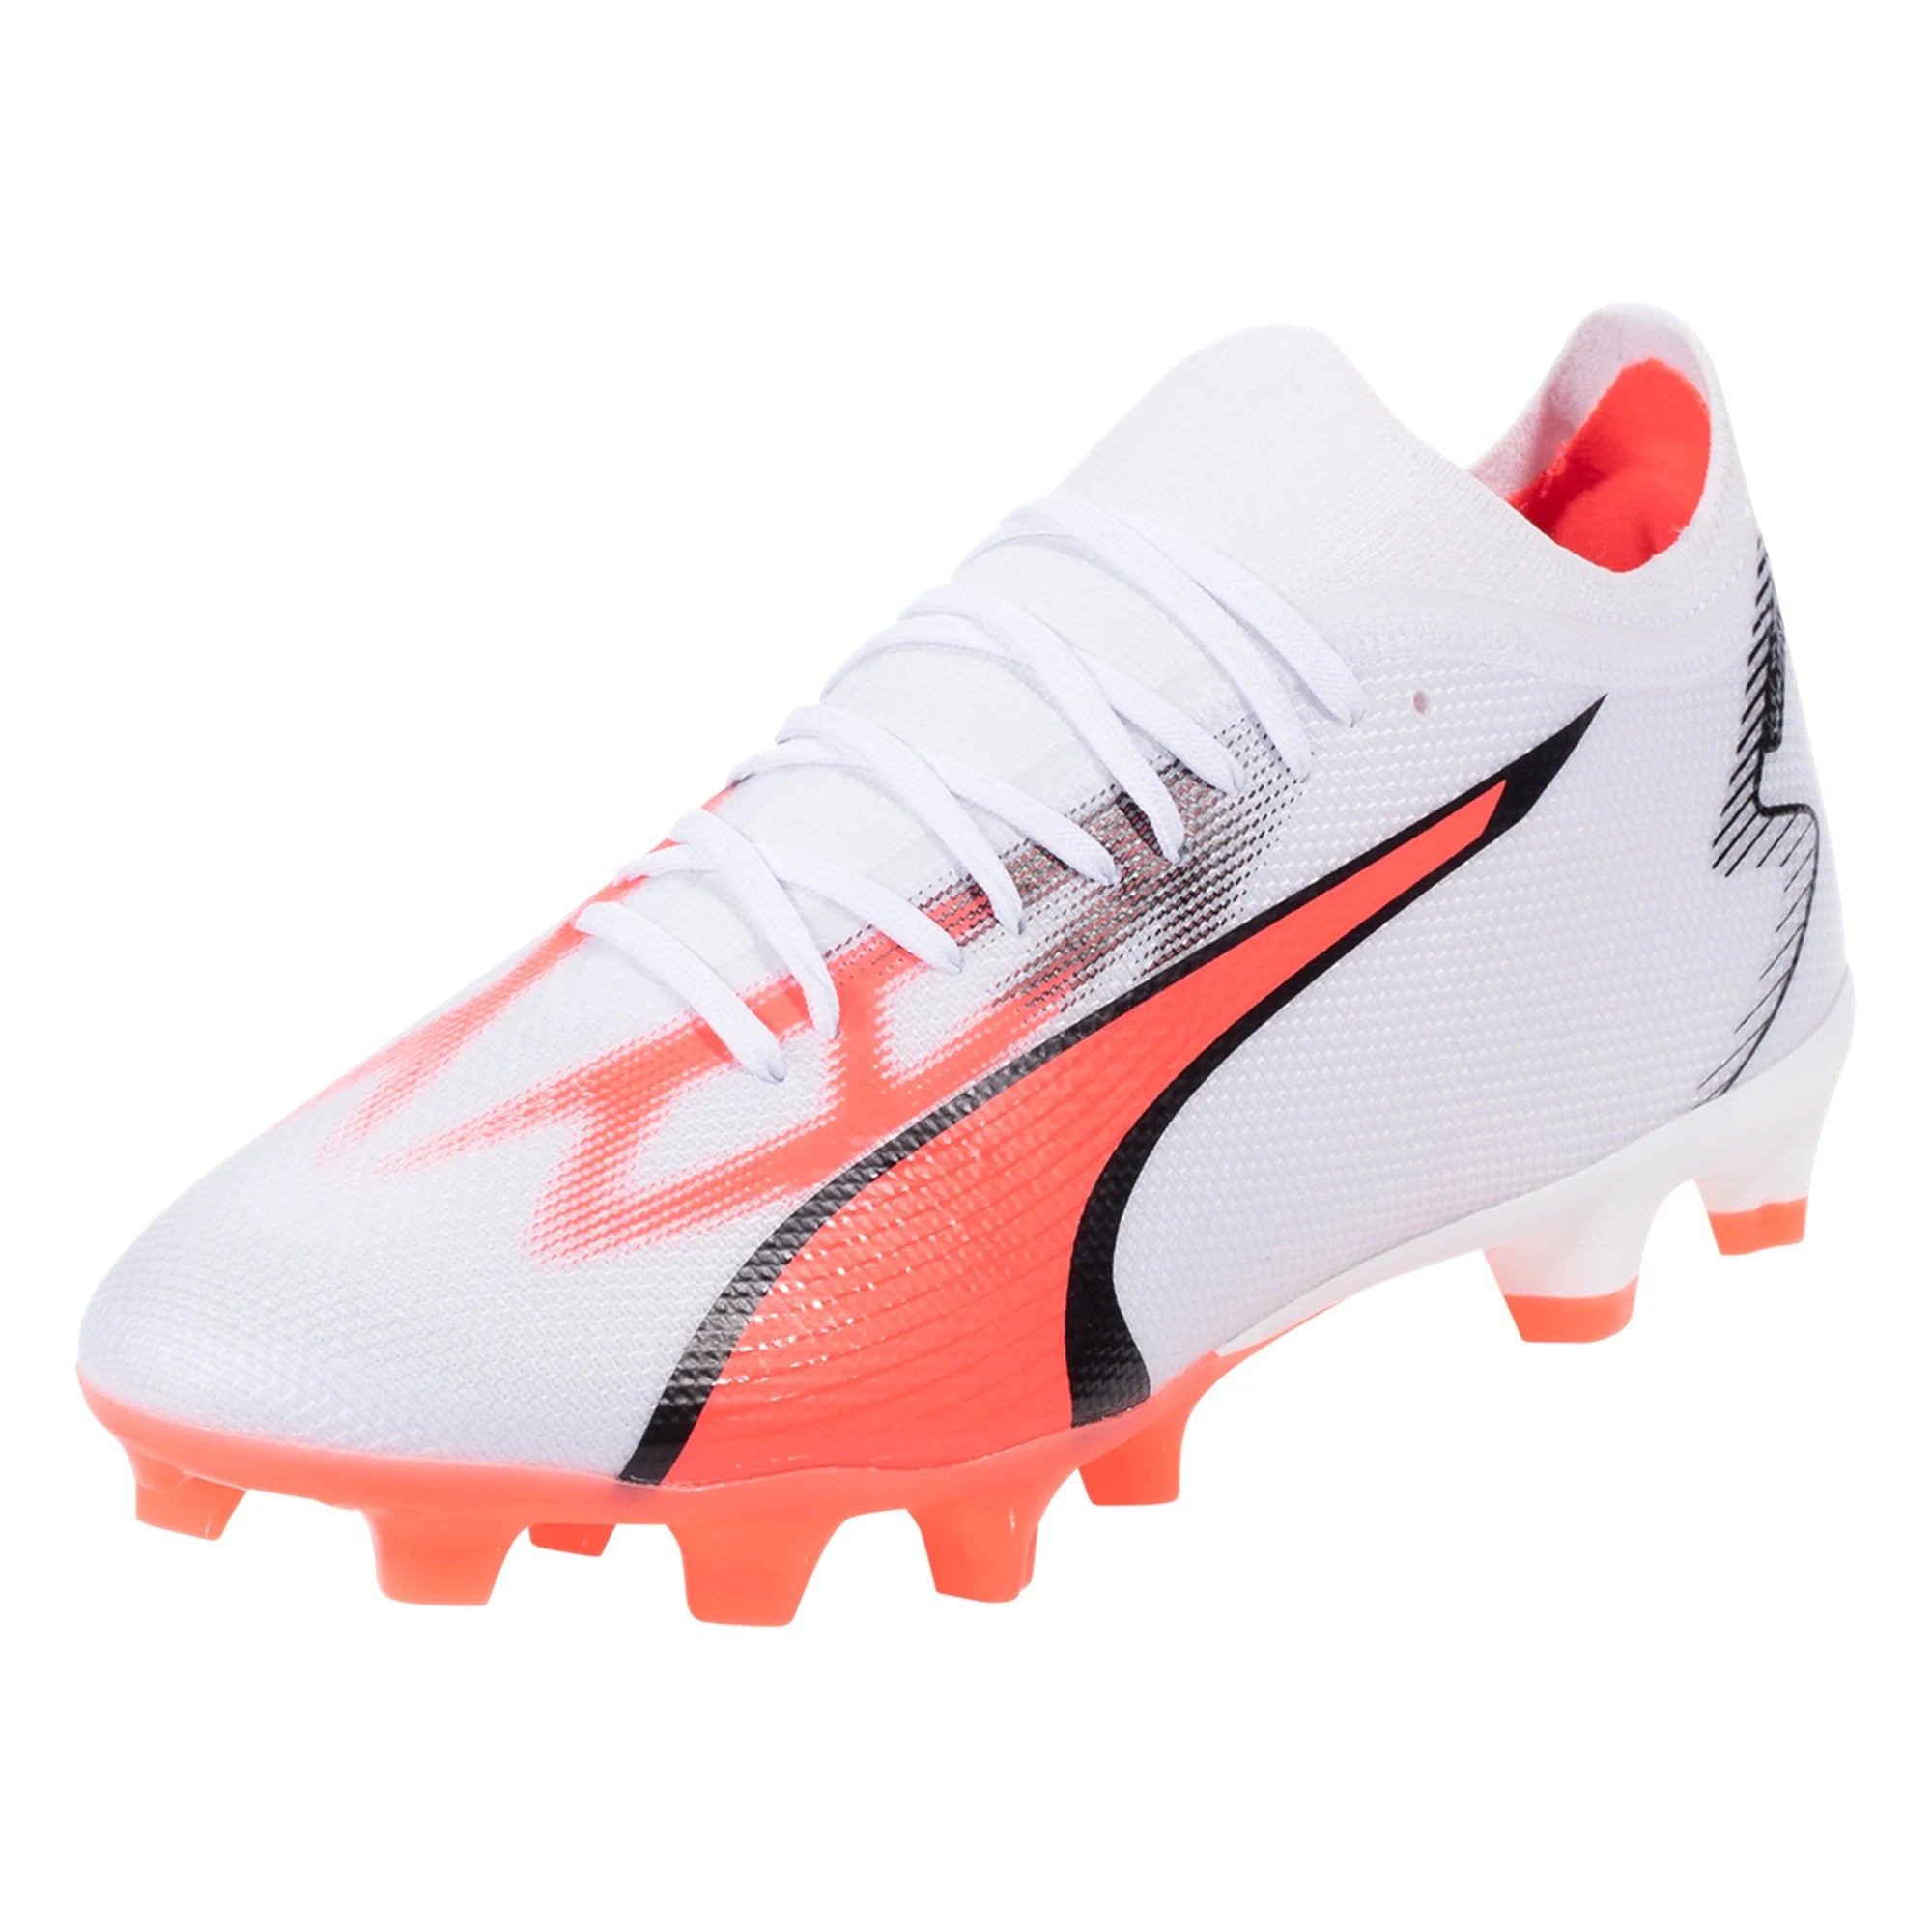 Puma Ultra Match FG/AG Firm USA - Cleat 107347-01 Soccer Orchid – White/Black/Fire Soccer Ground Zone